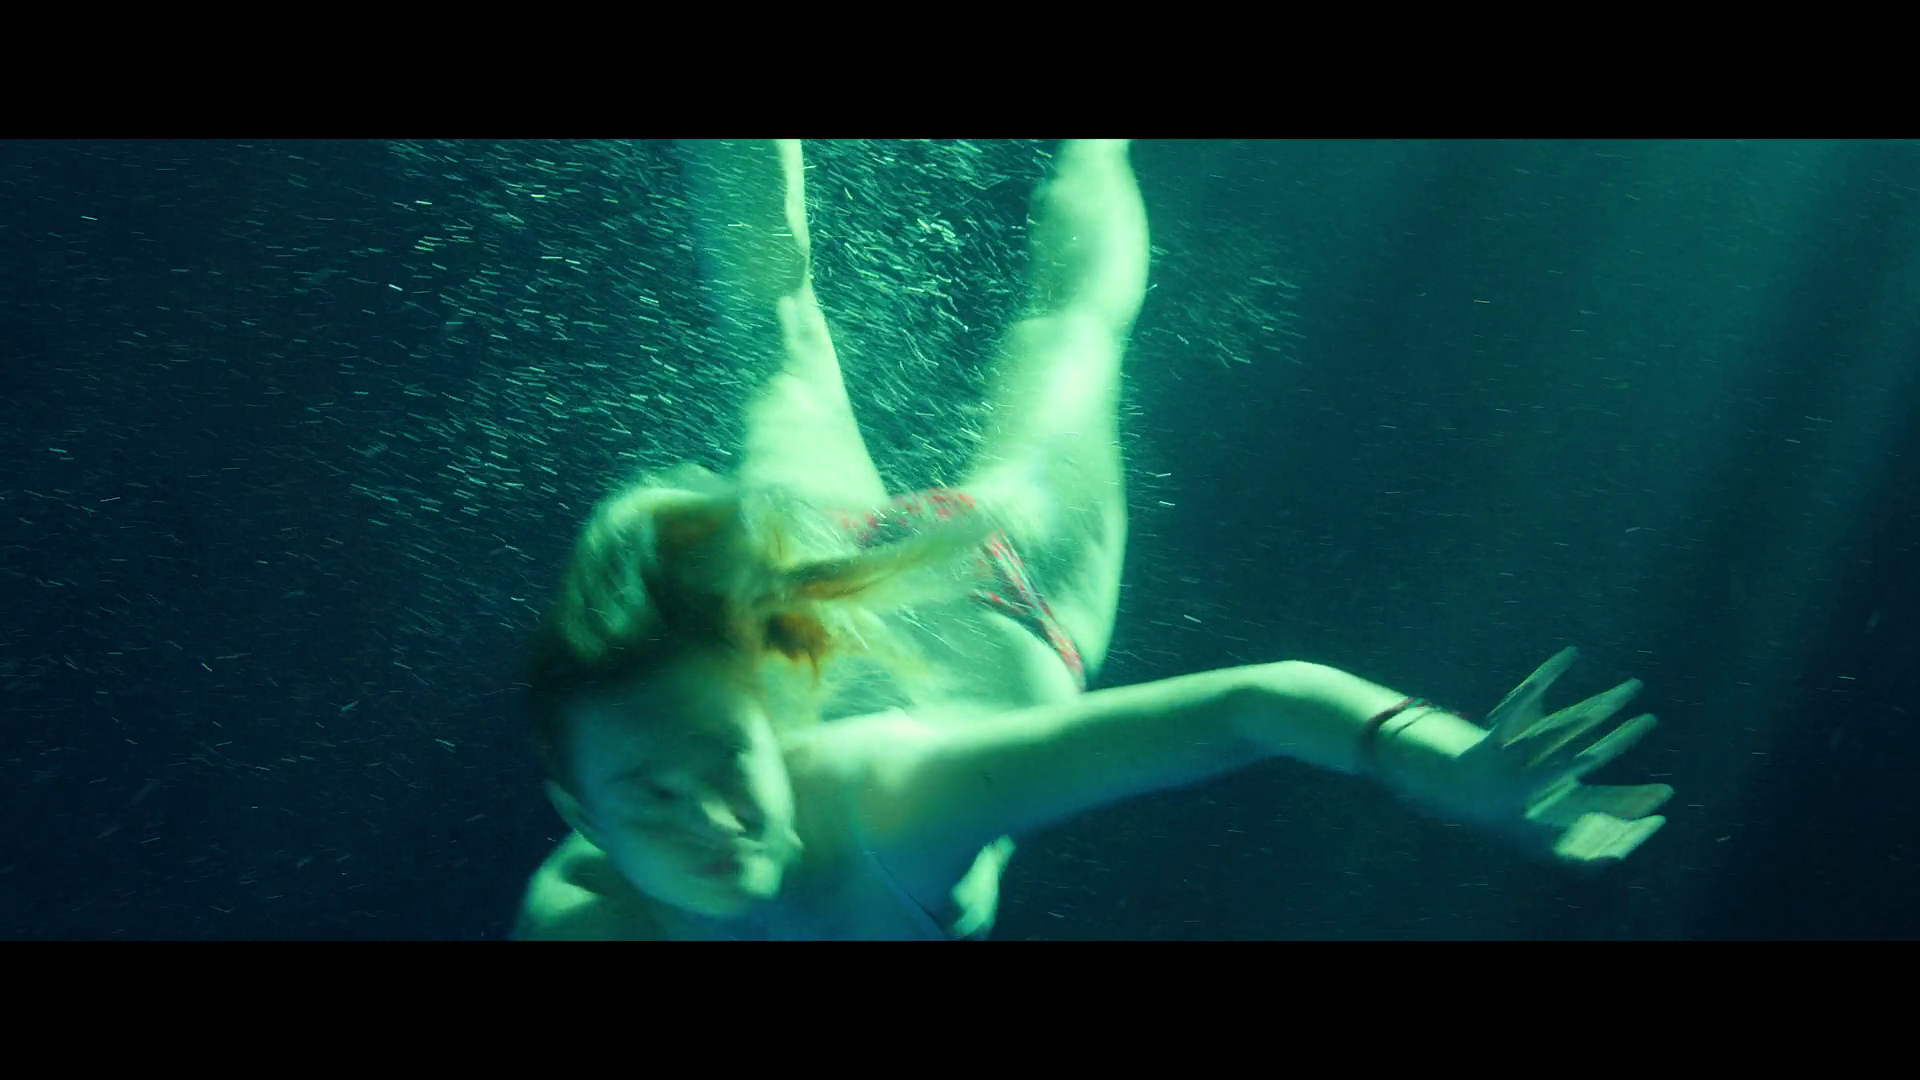 Photos n°4 : Elle Fanning’s Bikini in All the Bright Places